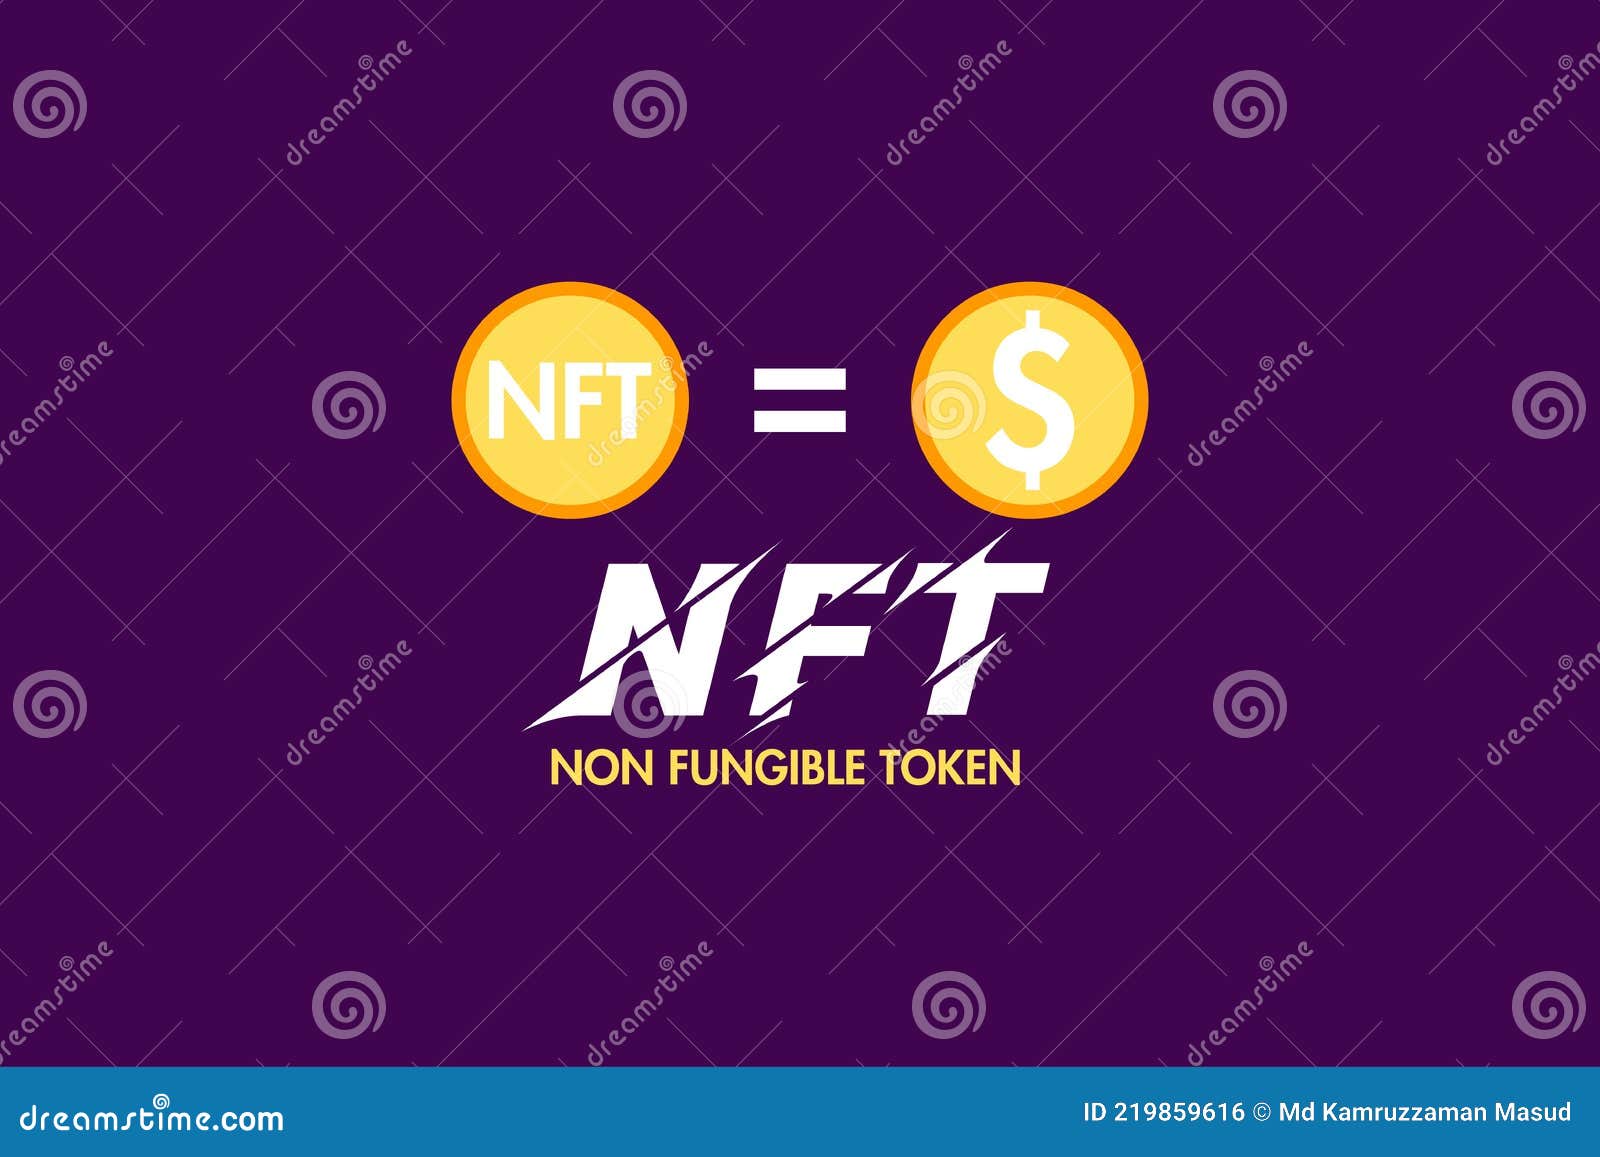 no fungible token unique cryptocurrency.   banner volcano erupts in nft coins.